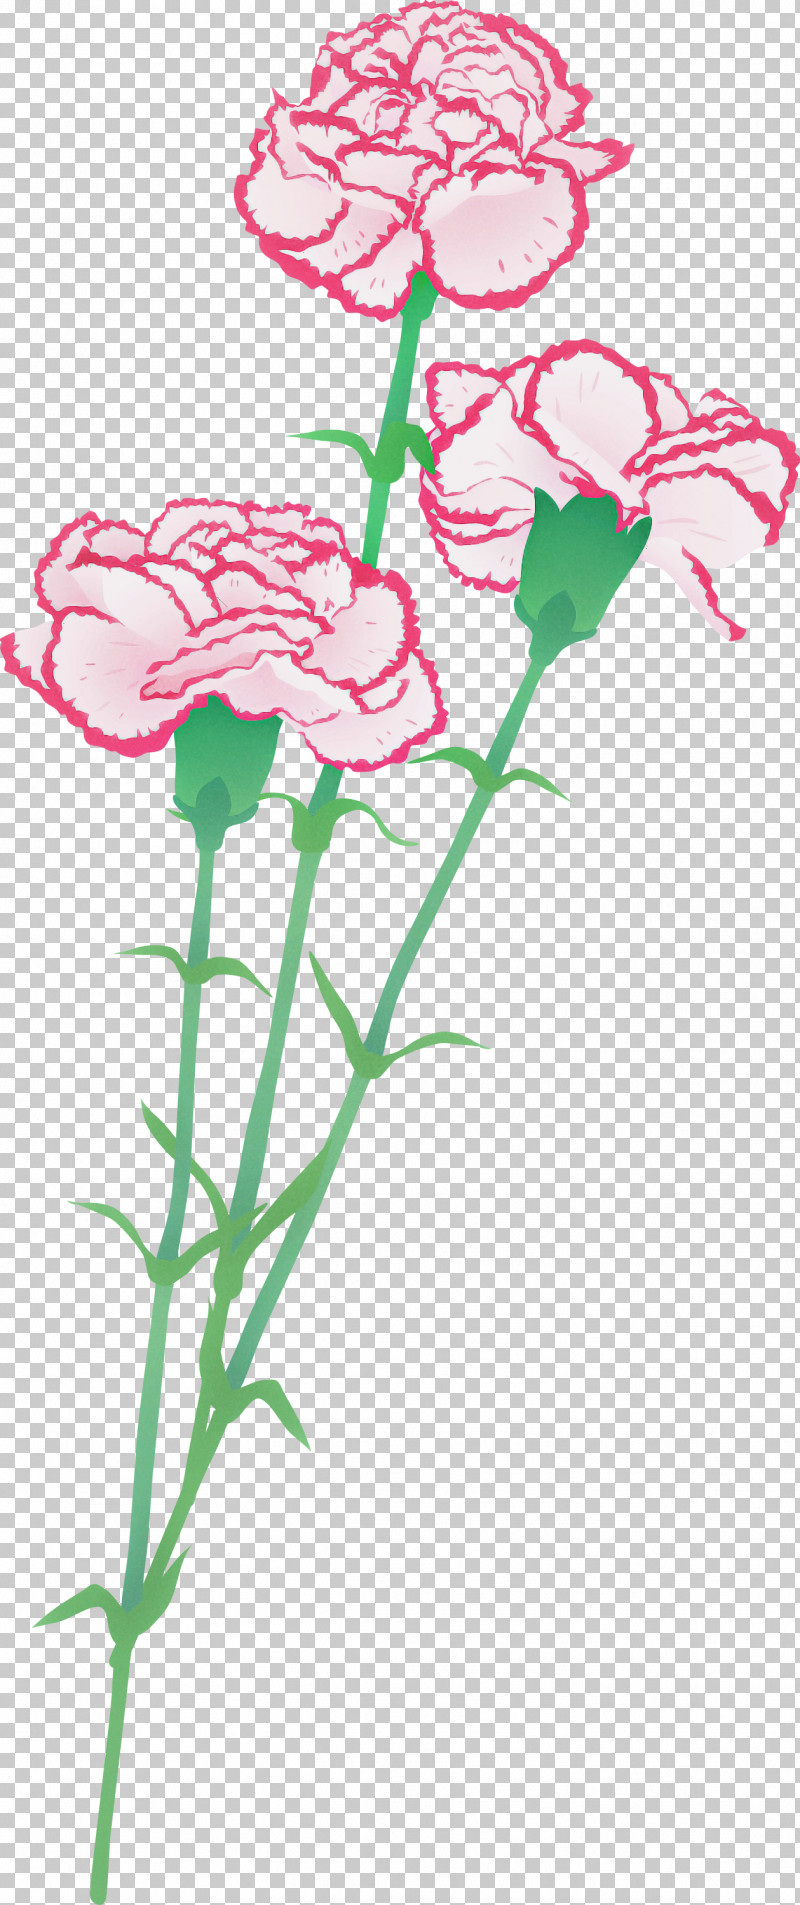 Flower Cut Flowers Pink Plant Carnation PNG, Clipart, Carnation, Cut Flowers, Dianthus, Flower, Pedicel Free PNG Download